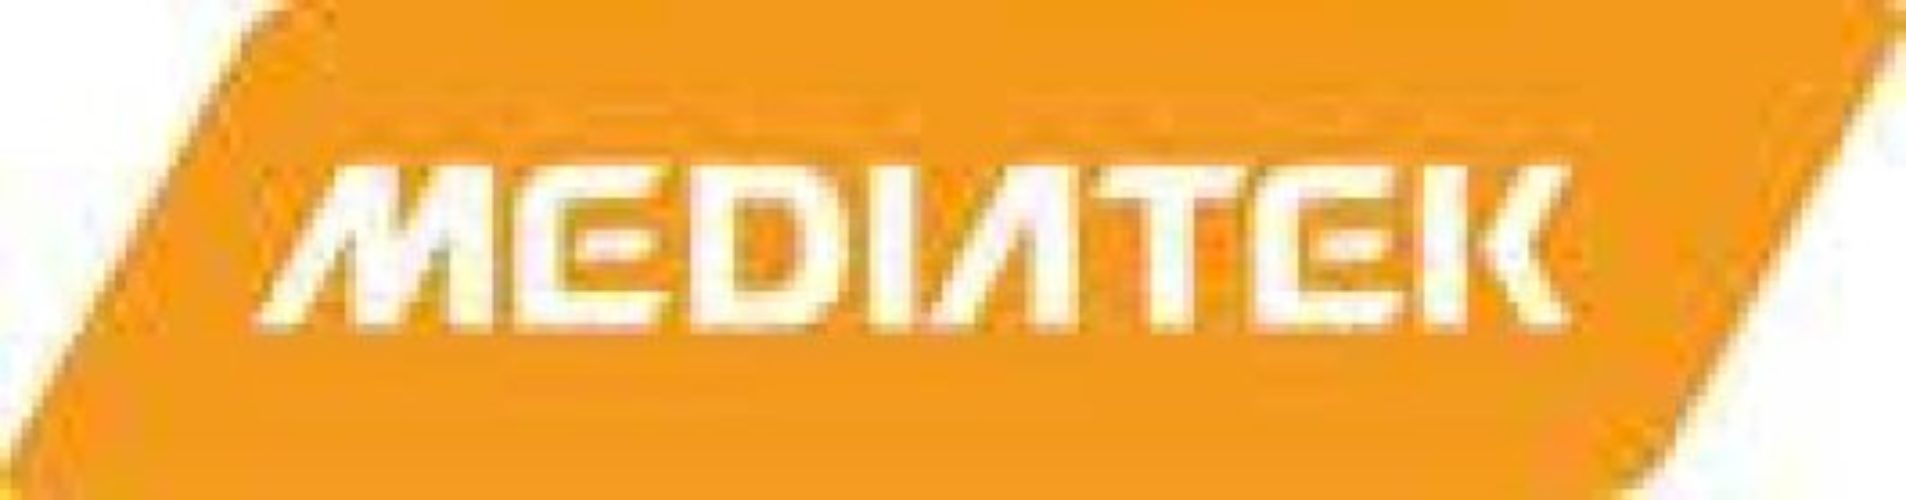 mediatek-enabling-enhanced-5g-experiences-across-smartphones,-smart-devices,-gaming-and-connectivity-solutions